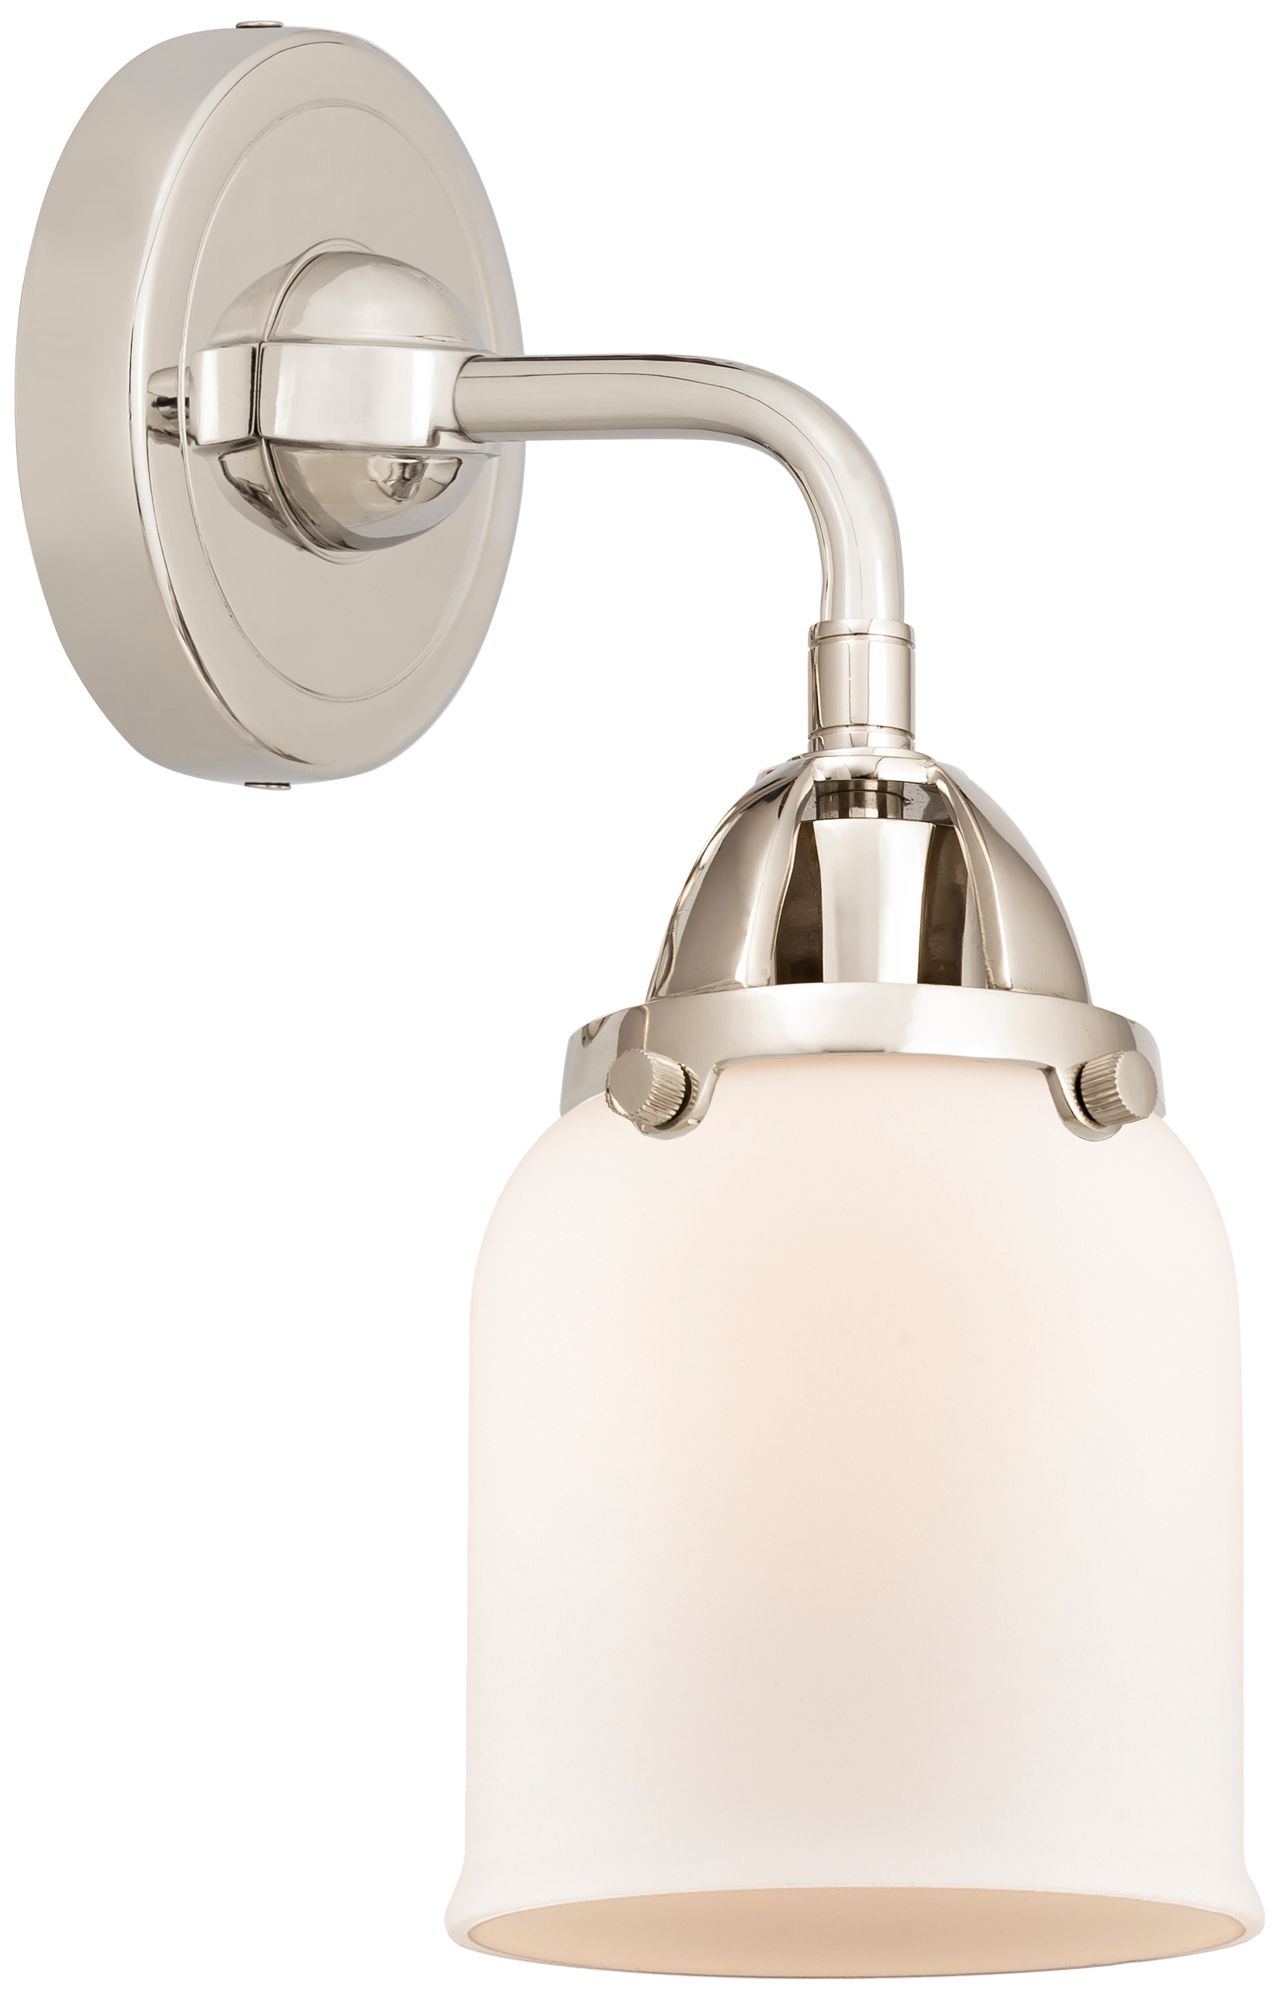 Nouveau 2 Bell 5" LED Sconce - Nickel Finish - Matte White Shade